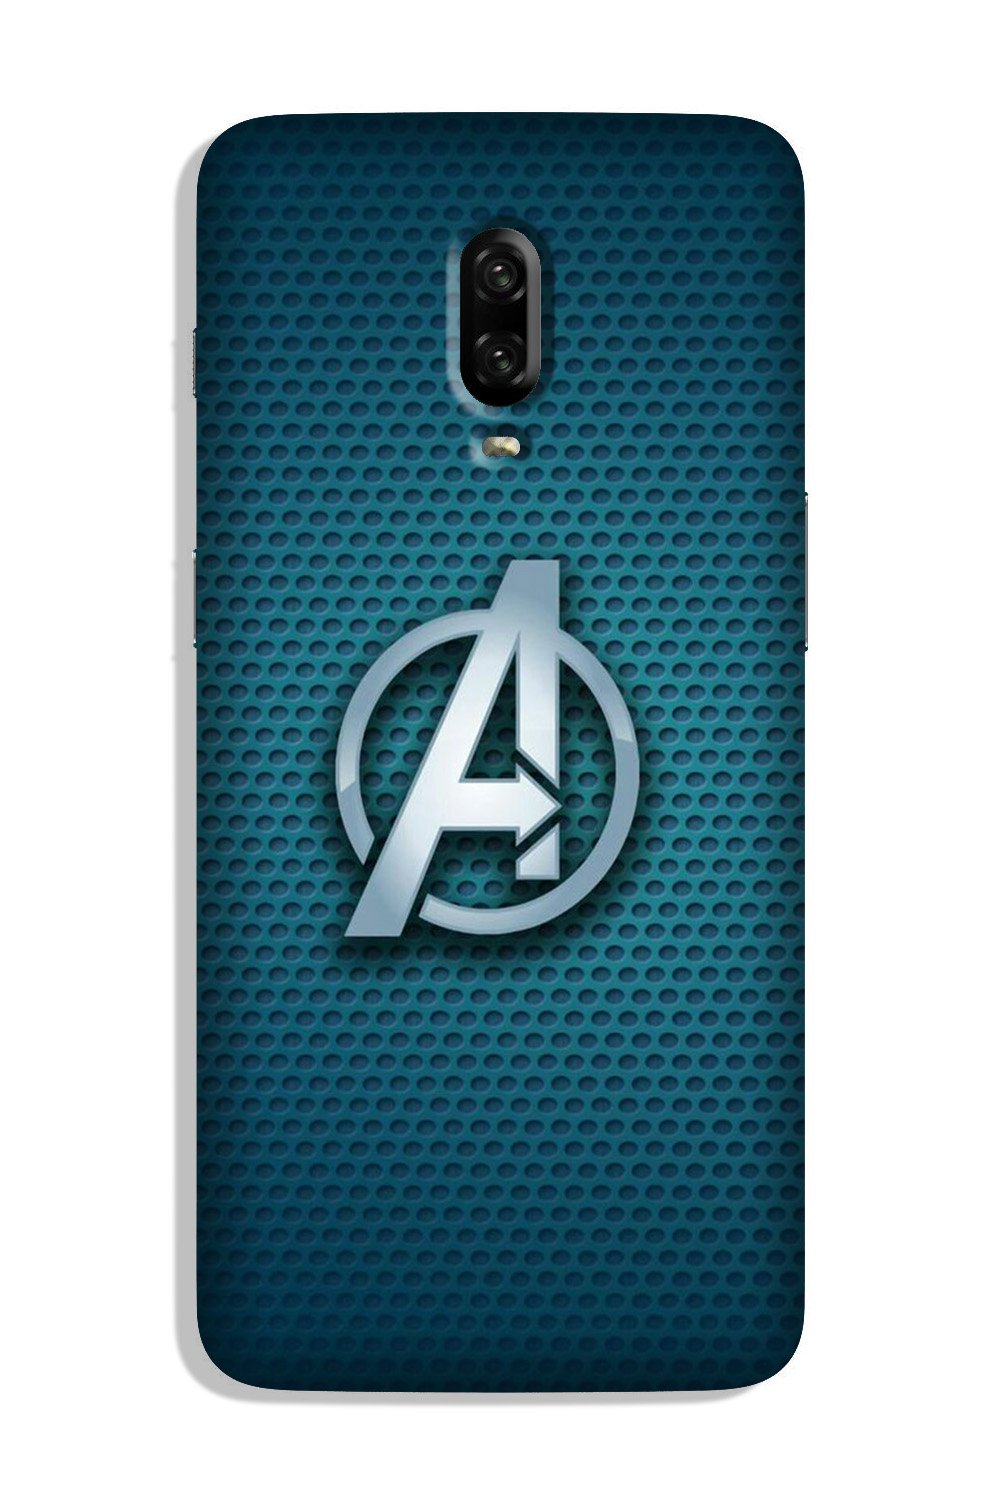 Avengers Case for OnePlus 7 (Design No. 246)